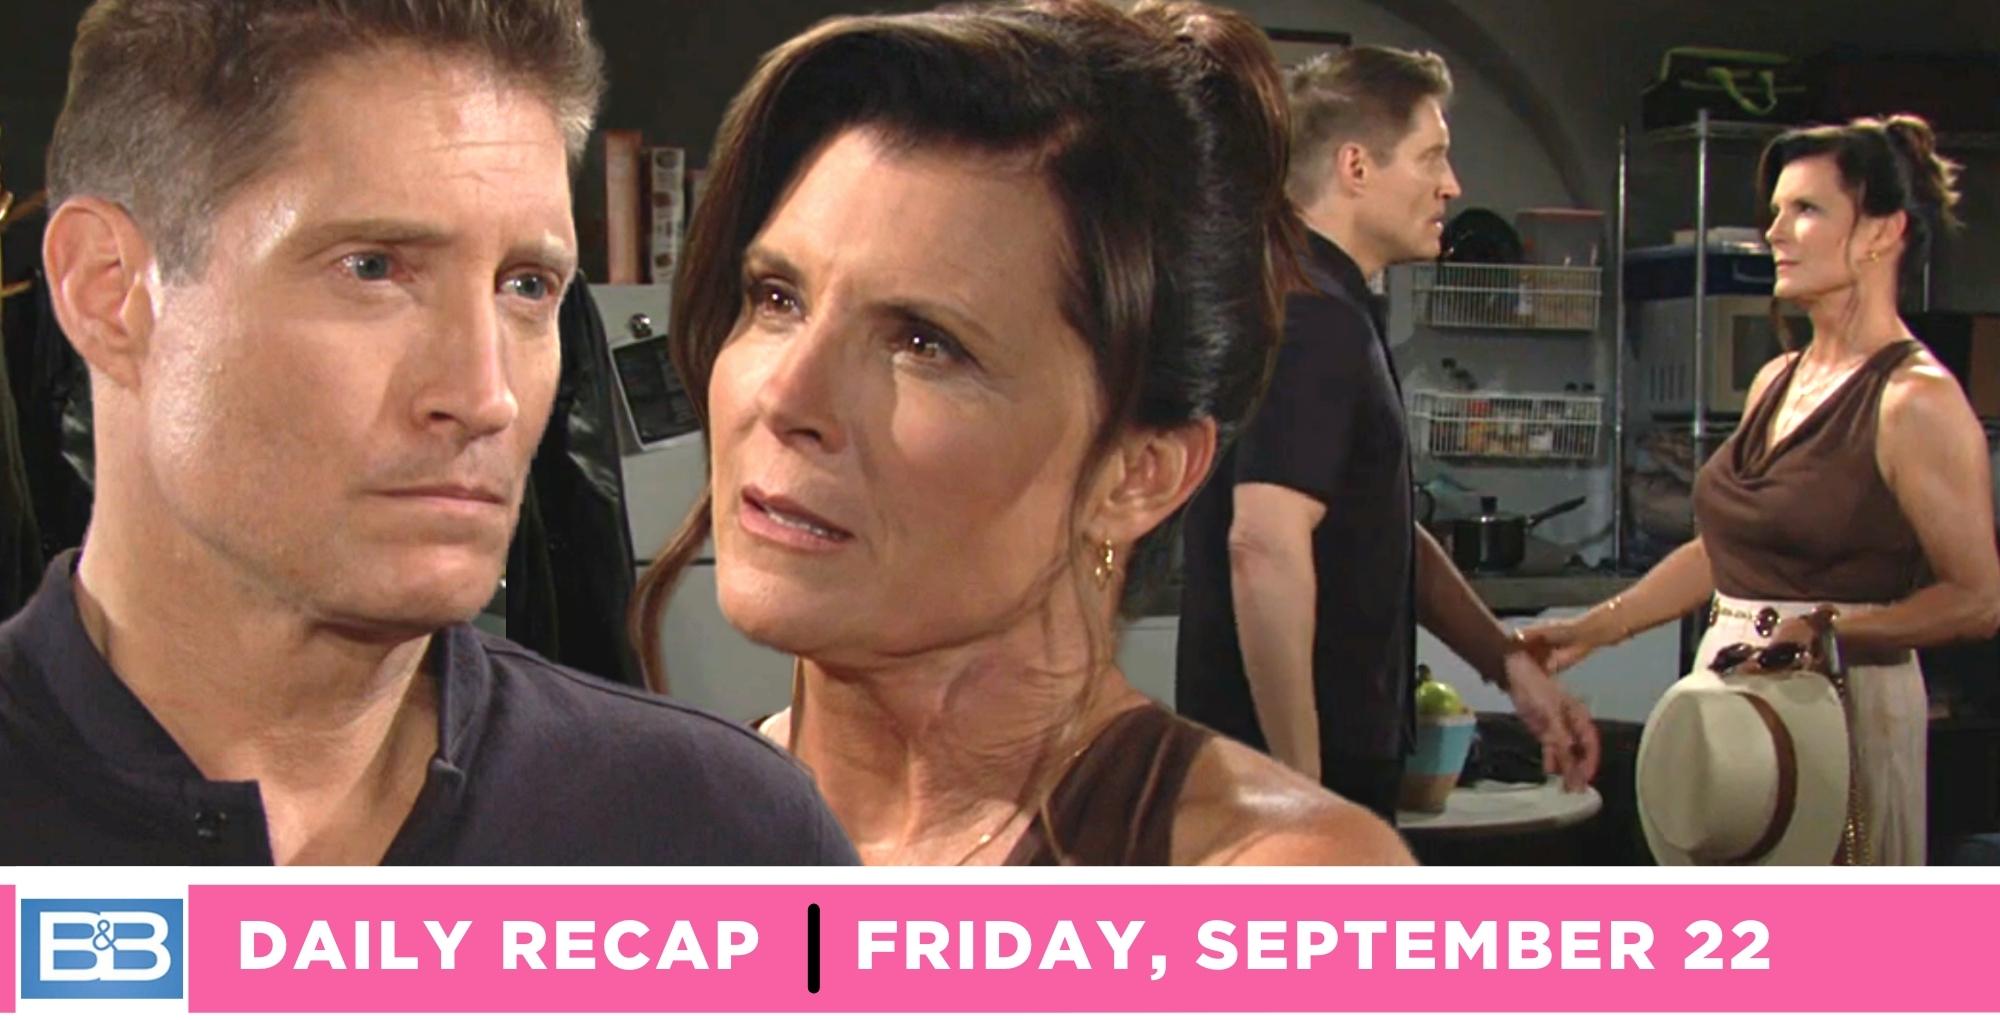 deacon sharpe ended things with sheila carter on the bold and the beautiful recap for friday, september 22, 2023.